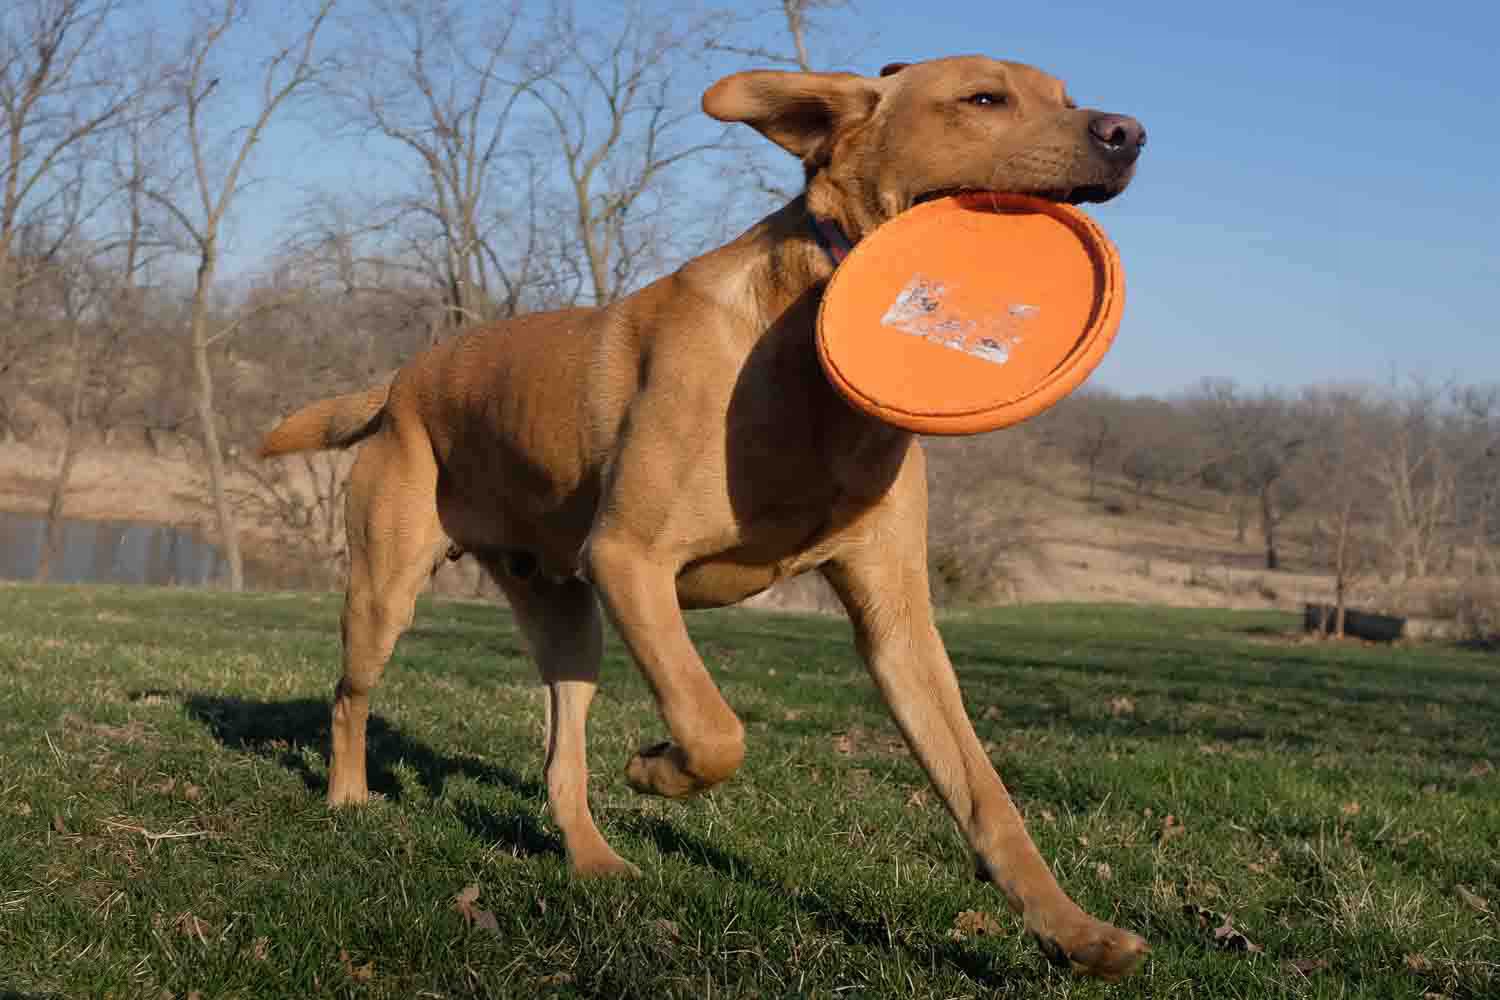 JPEG vs HEIC: A dog running across a field with a frisbee in its mouth. Image shows visible JPEG compression artifacts from being reduced in file size.